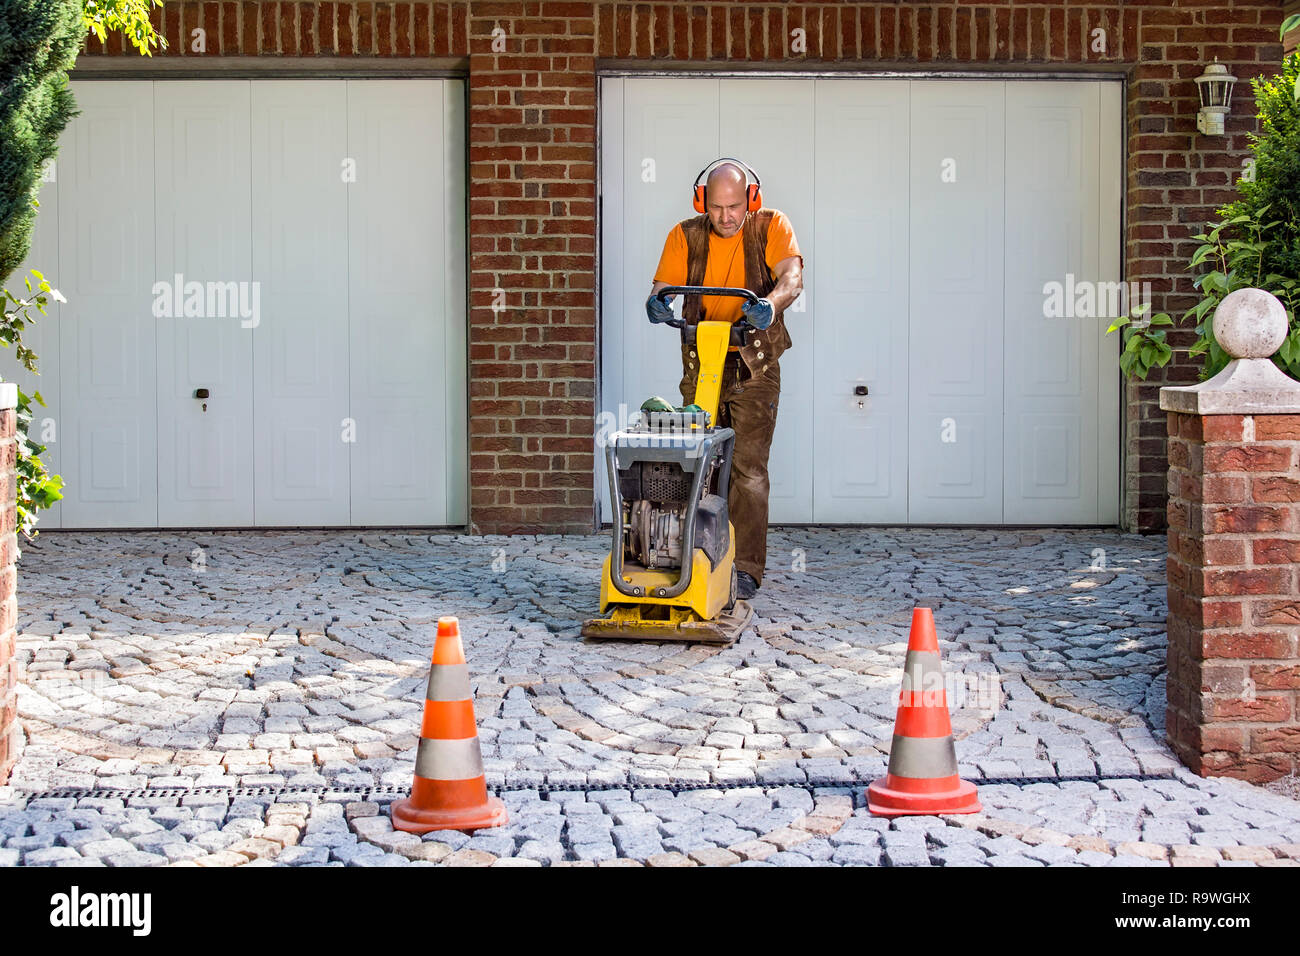 Builder or contractor laying new paving bricks in a house driveway using a mechanical compacter for compaction of the cement pavers. Stock Photo